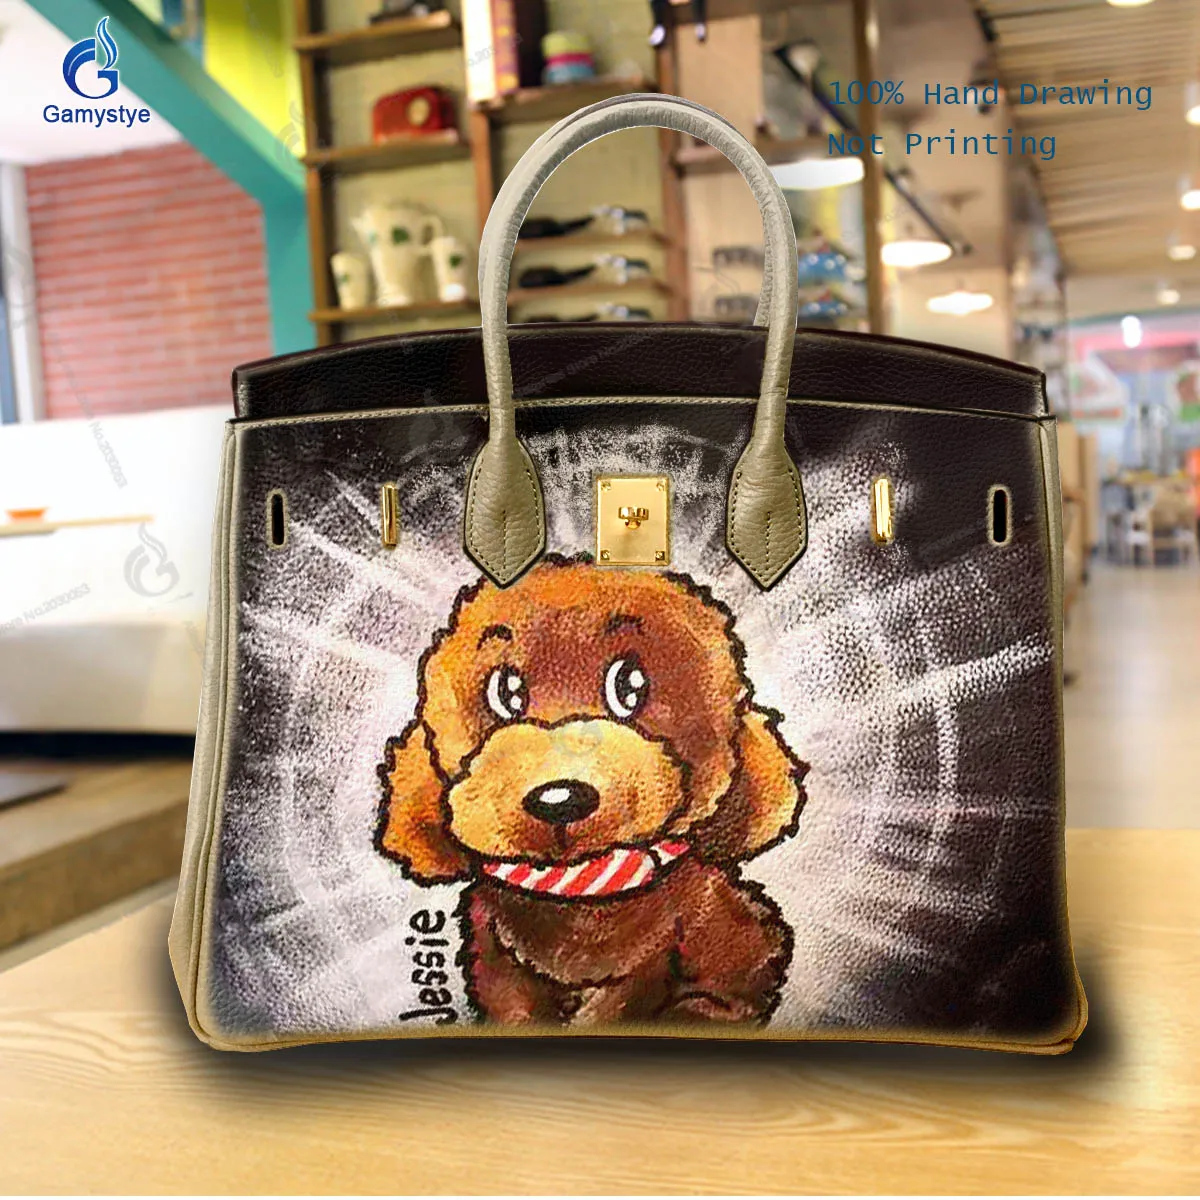 

Art Hand-Painting A small dog wearing a scarf Customize Totes For women Handbag Designer Shoulder Bag Genuine Leather Multicolor